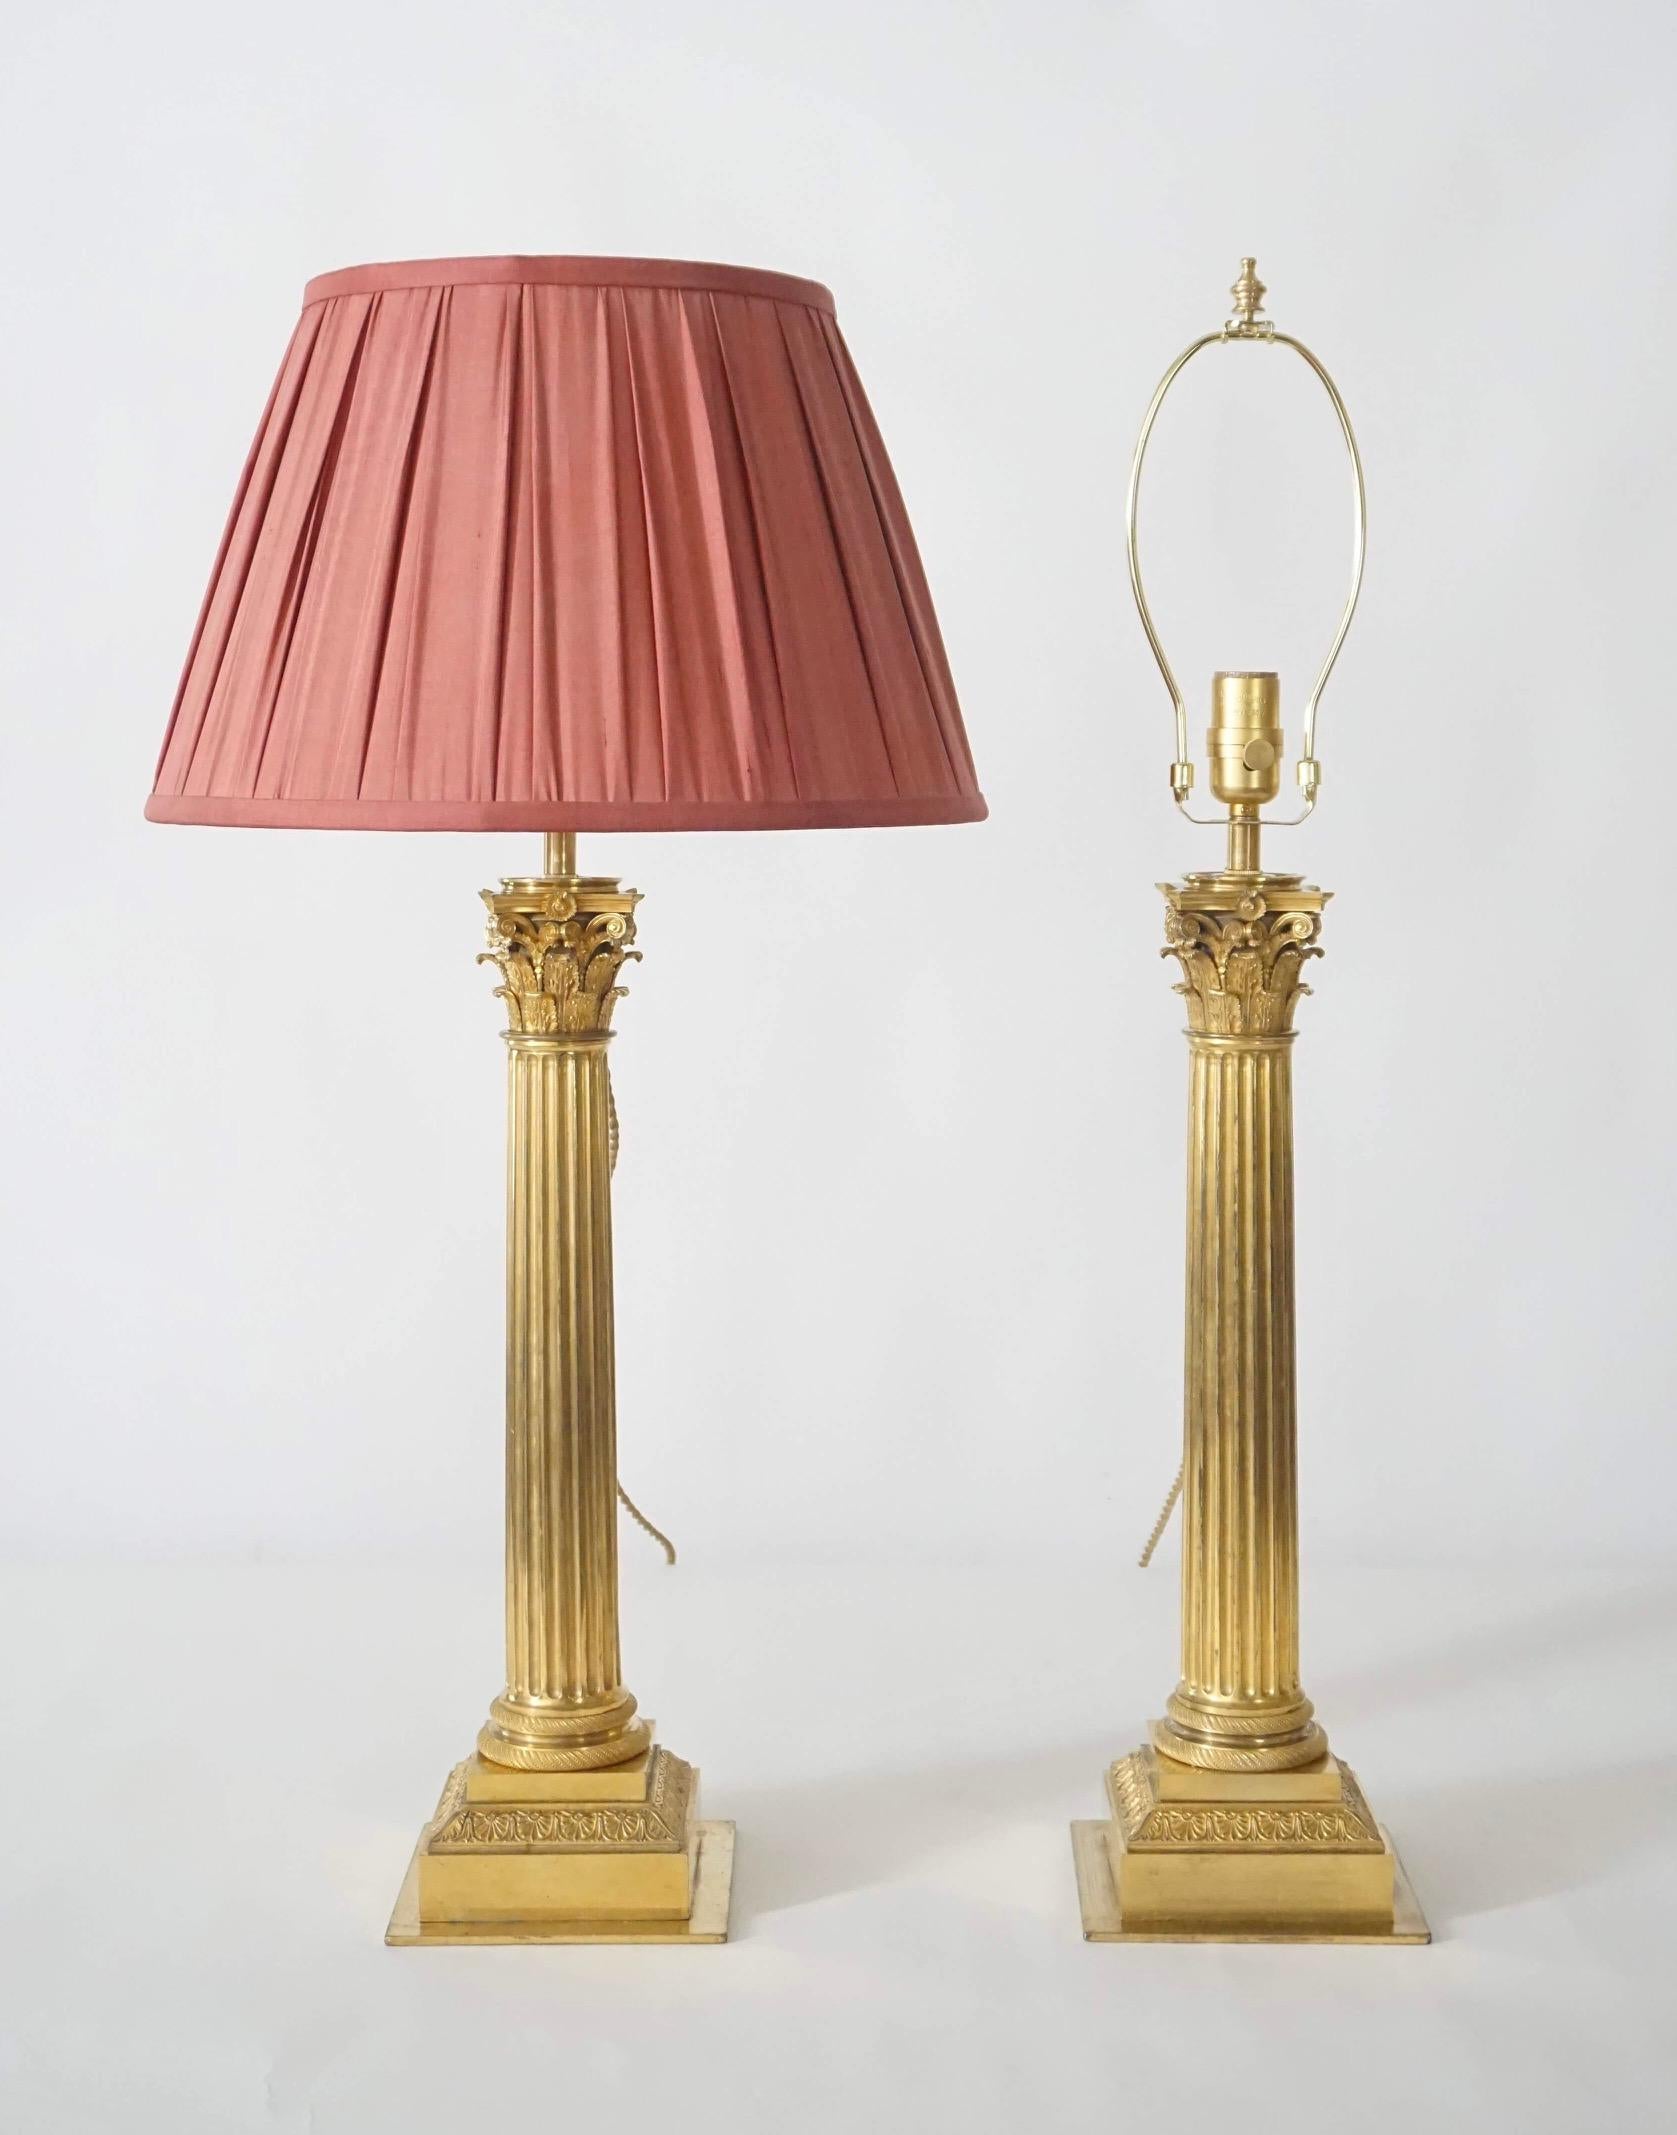 An exquisite pair of neoclassical Corinthian column form table lamps converted to electricity in the early 20th century from circa 1825 French Sinumbra oil lamp bases, the lost-wax-cast ormolu bronze capitals atop gilt-metal fluted shafts on ormolu